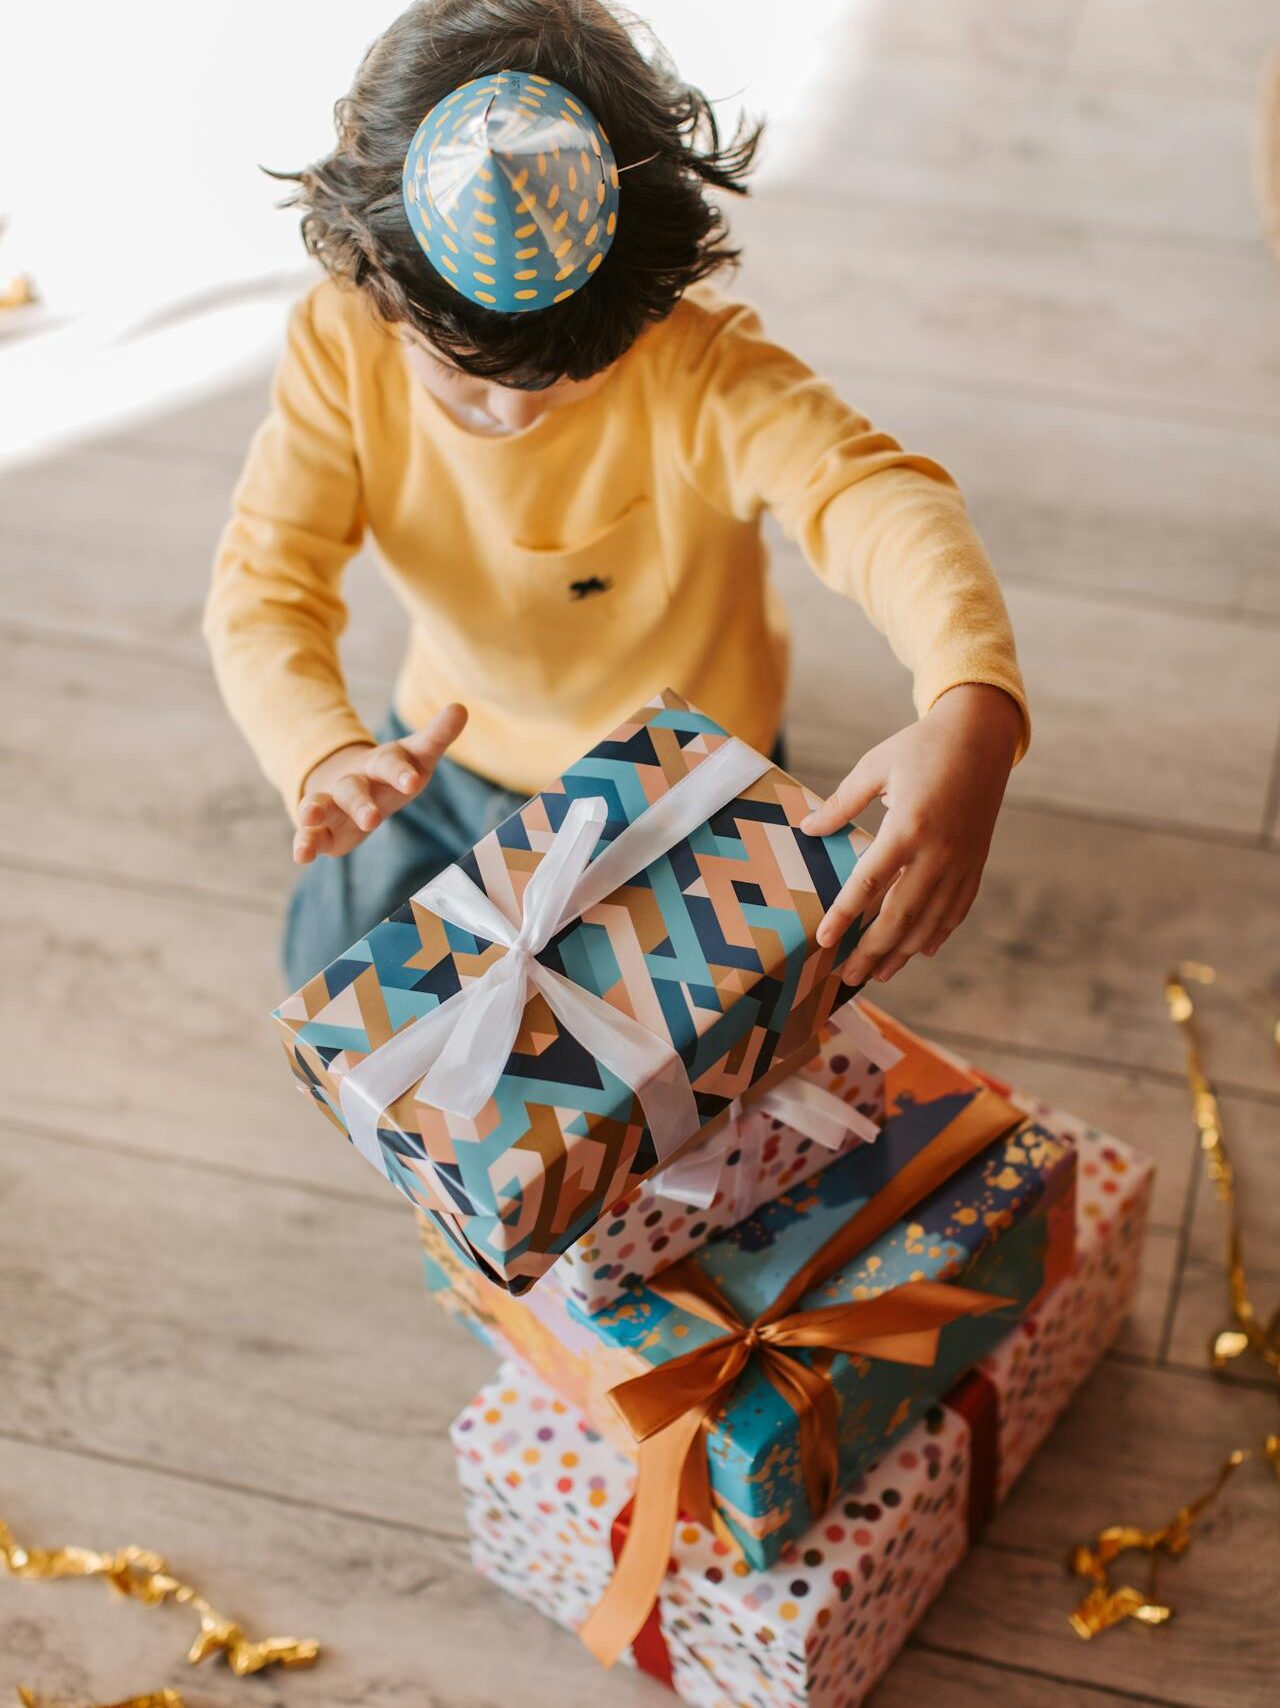 CONSIDERATIONS WHEN CHOOSING GIFTS FOR CHILDREN WITH AUTISM